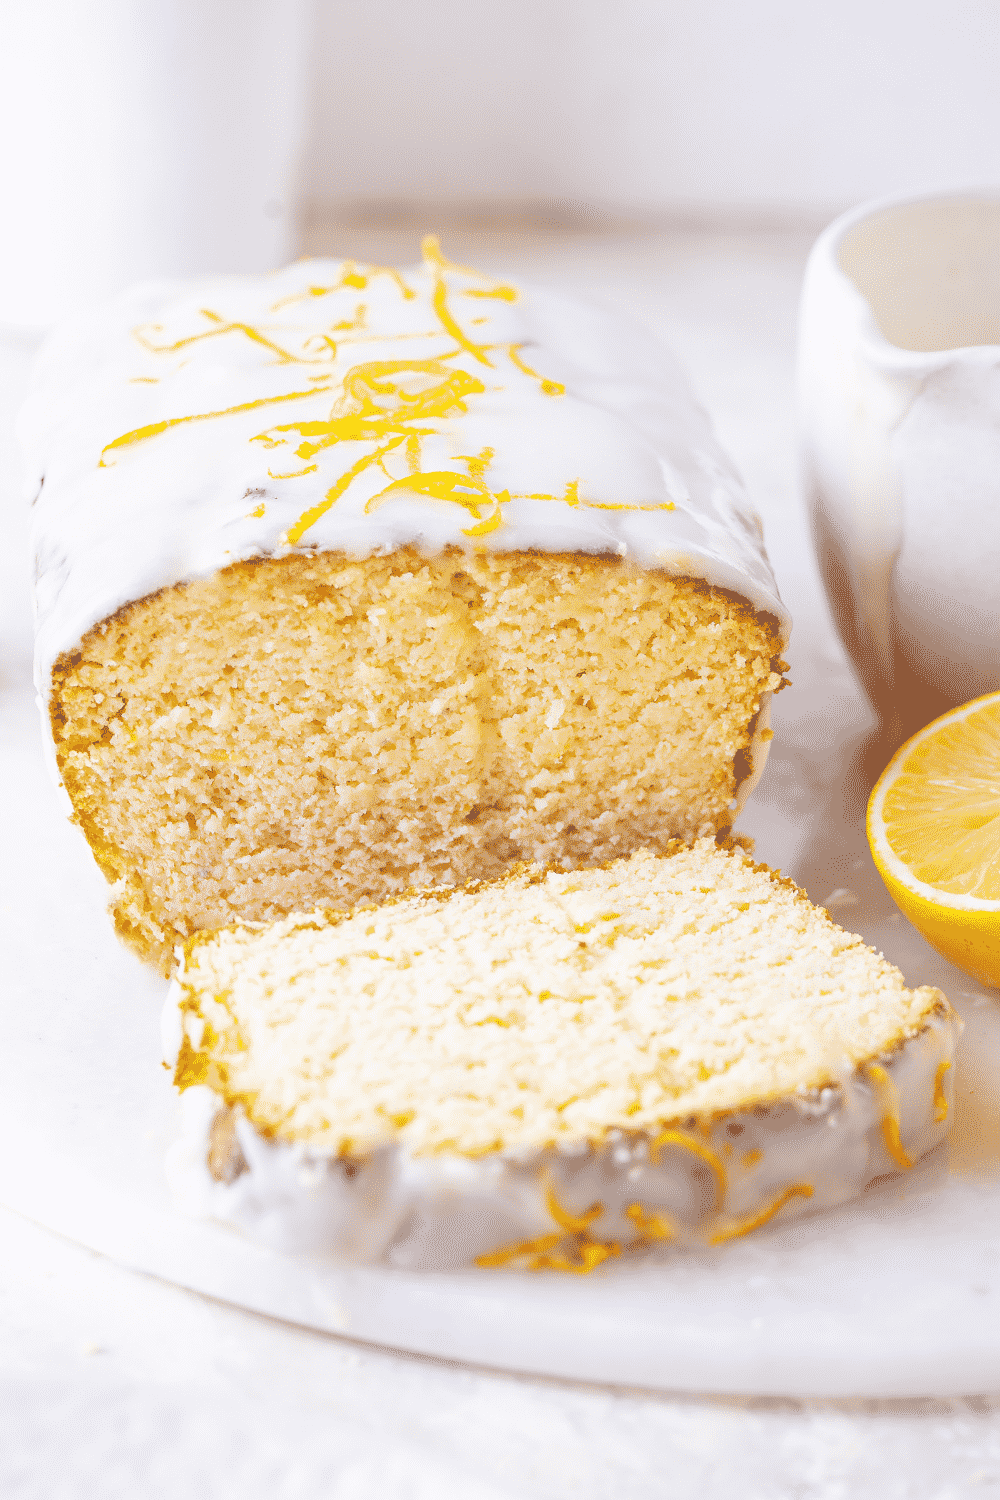 A loaf of keto lemon pound cake on a white saucer. A slice off the front of loaf is lying flat directly in front of the loaf and on the saucer. There is a cup of keto glaze and a sliced lemon to the right of the loaf of keto cake.